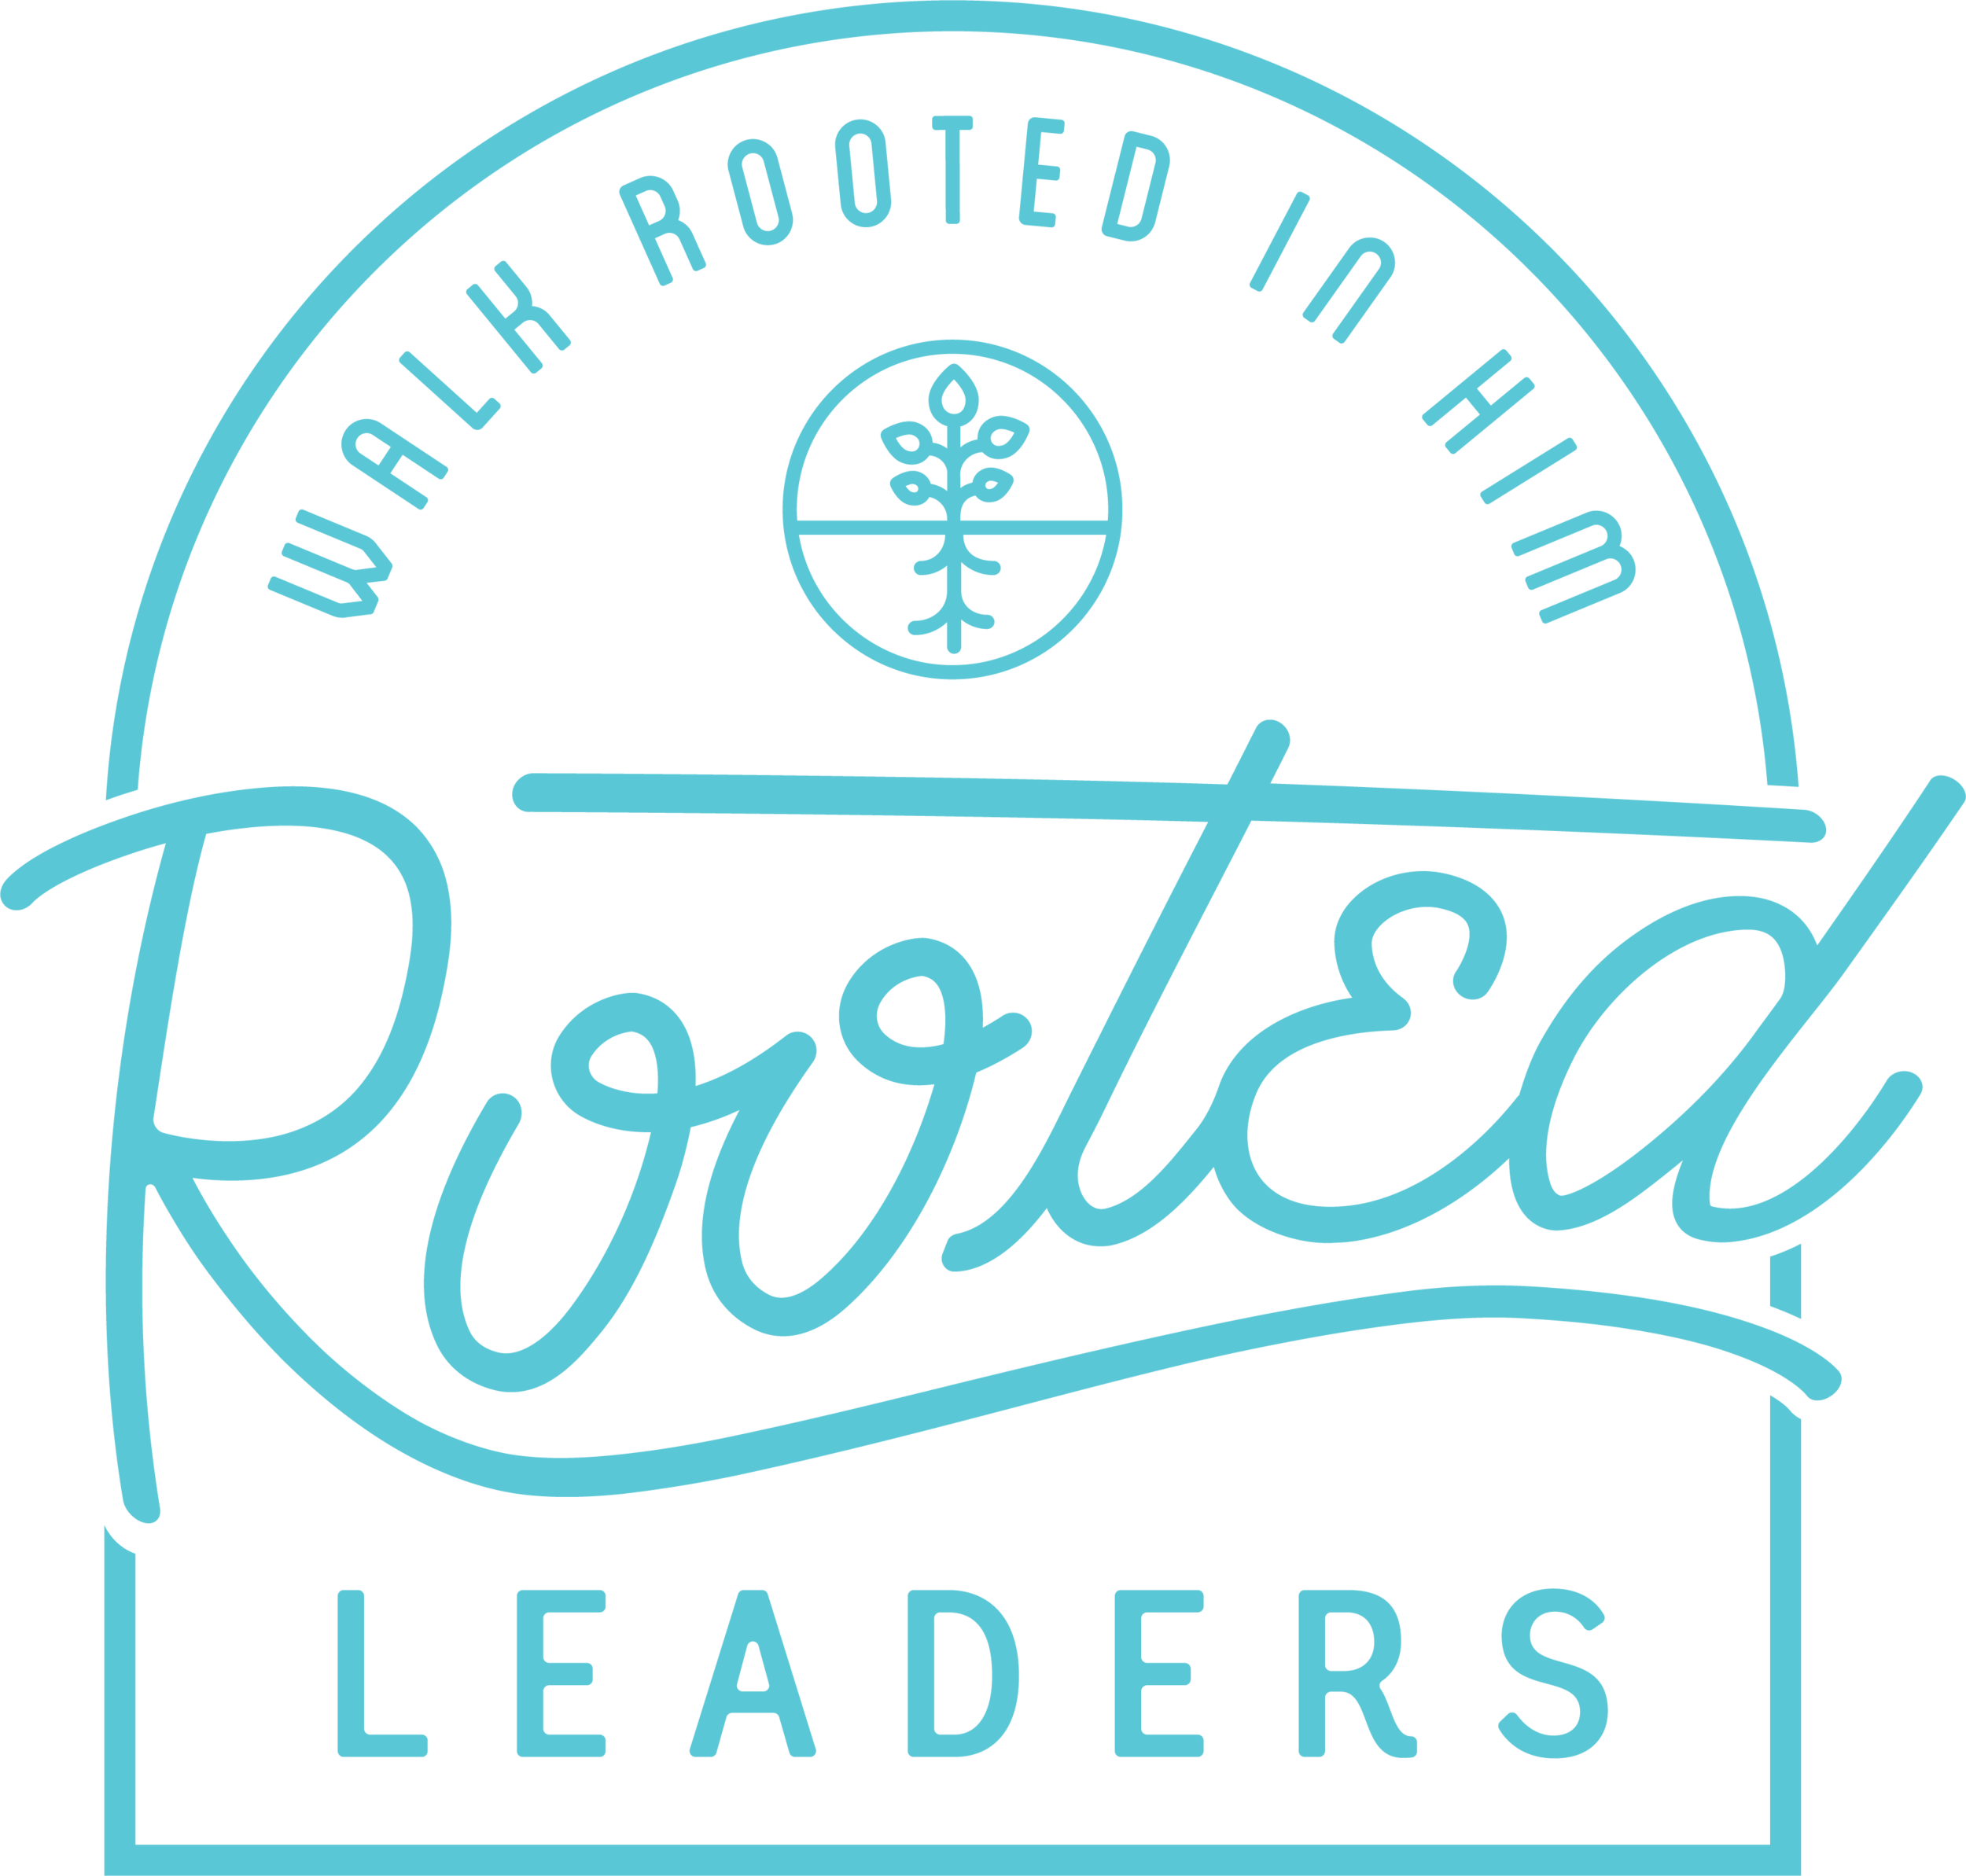 Rooted Leaders